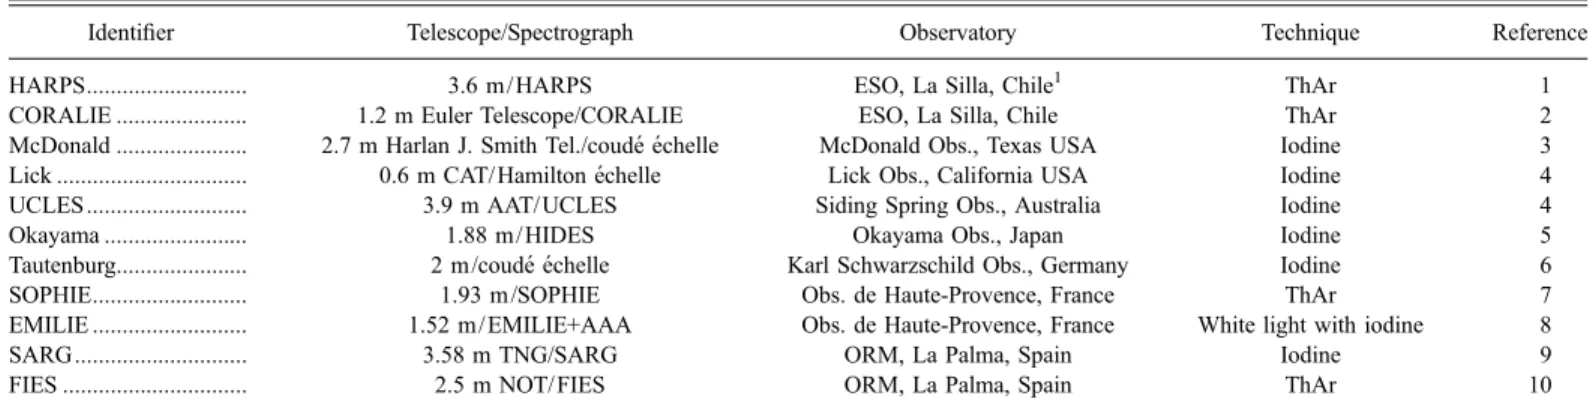 TABLE 1 Participating Telescopes